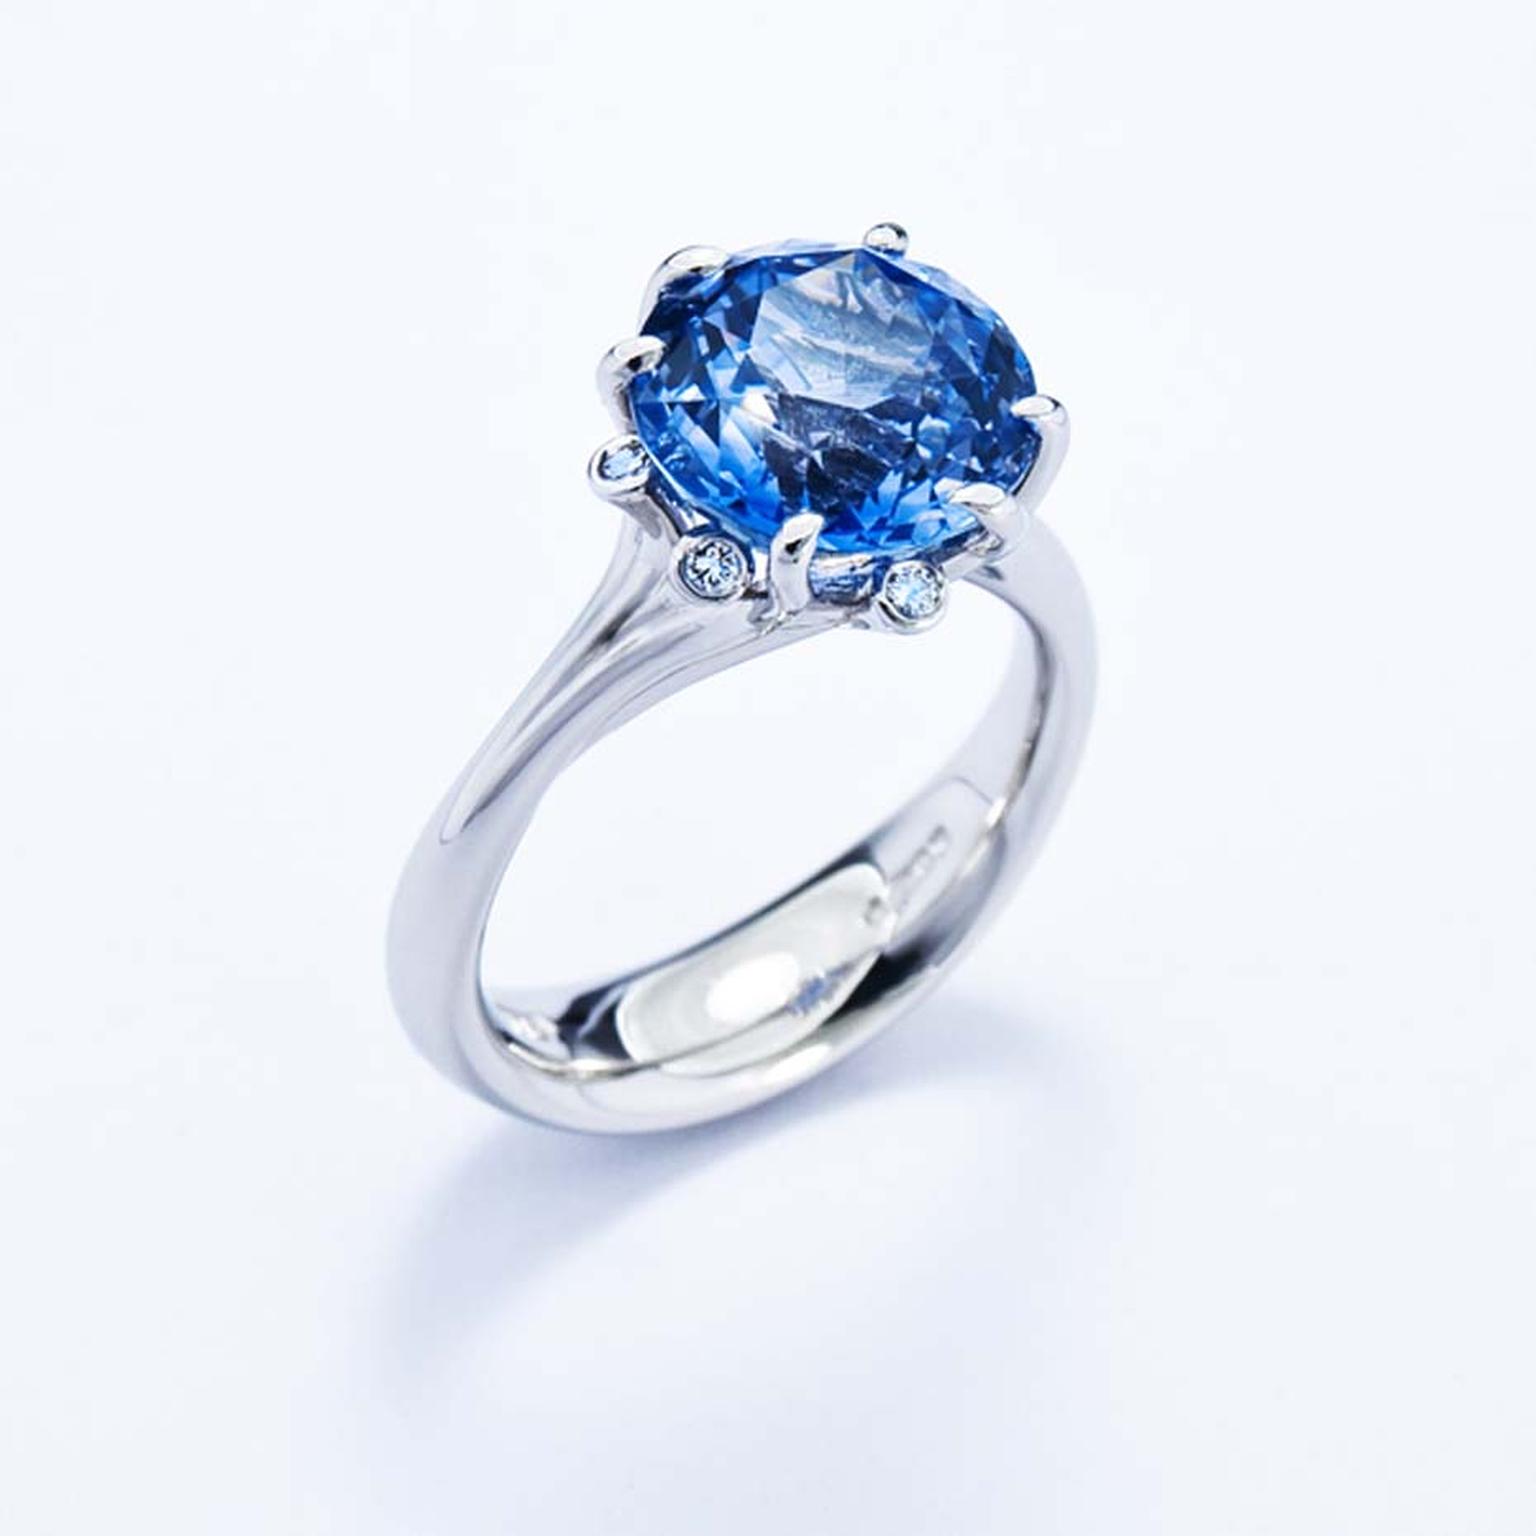 Jon Dibben Meadow ring with a centre sapphire set in